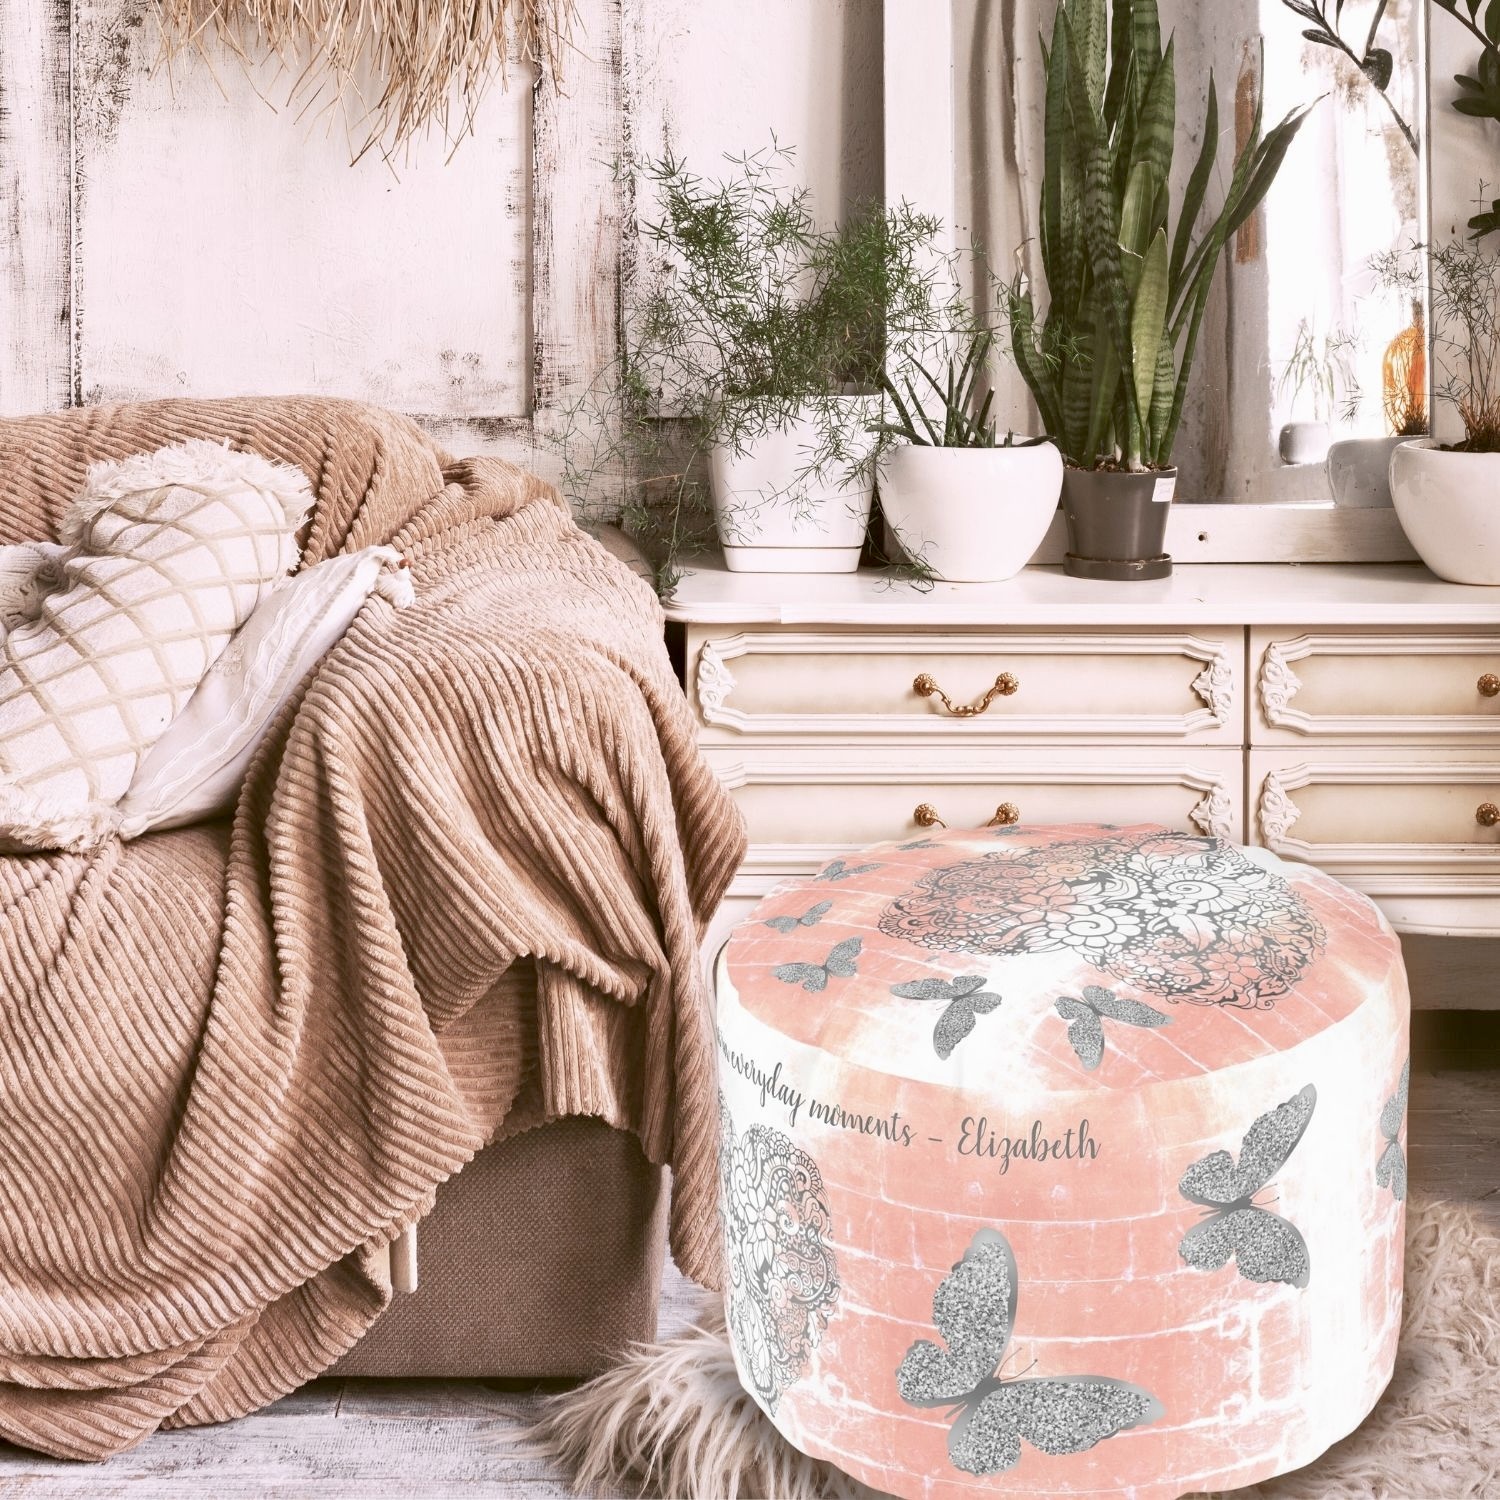 A rustic peach pouf with a gray heart centerpiece surrounded by silver butterflies, adding charm to a cozy bohemian bedroom.